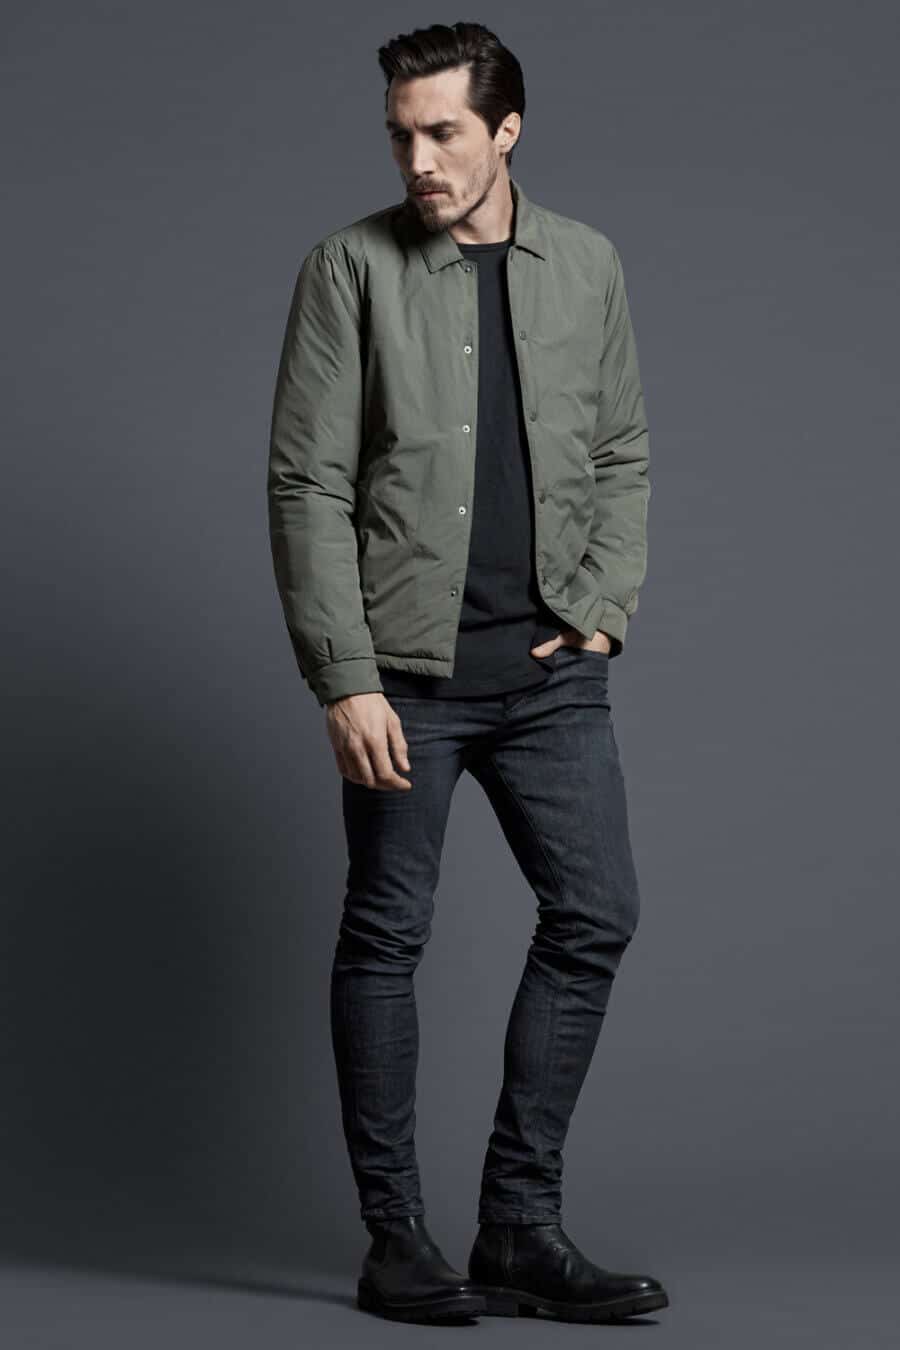 Men's black jeans and green padded overshirt outfit